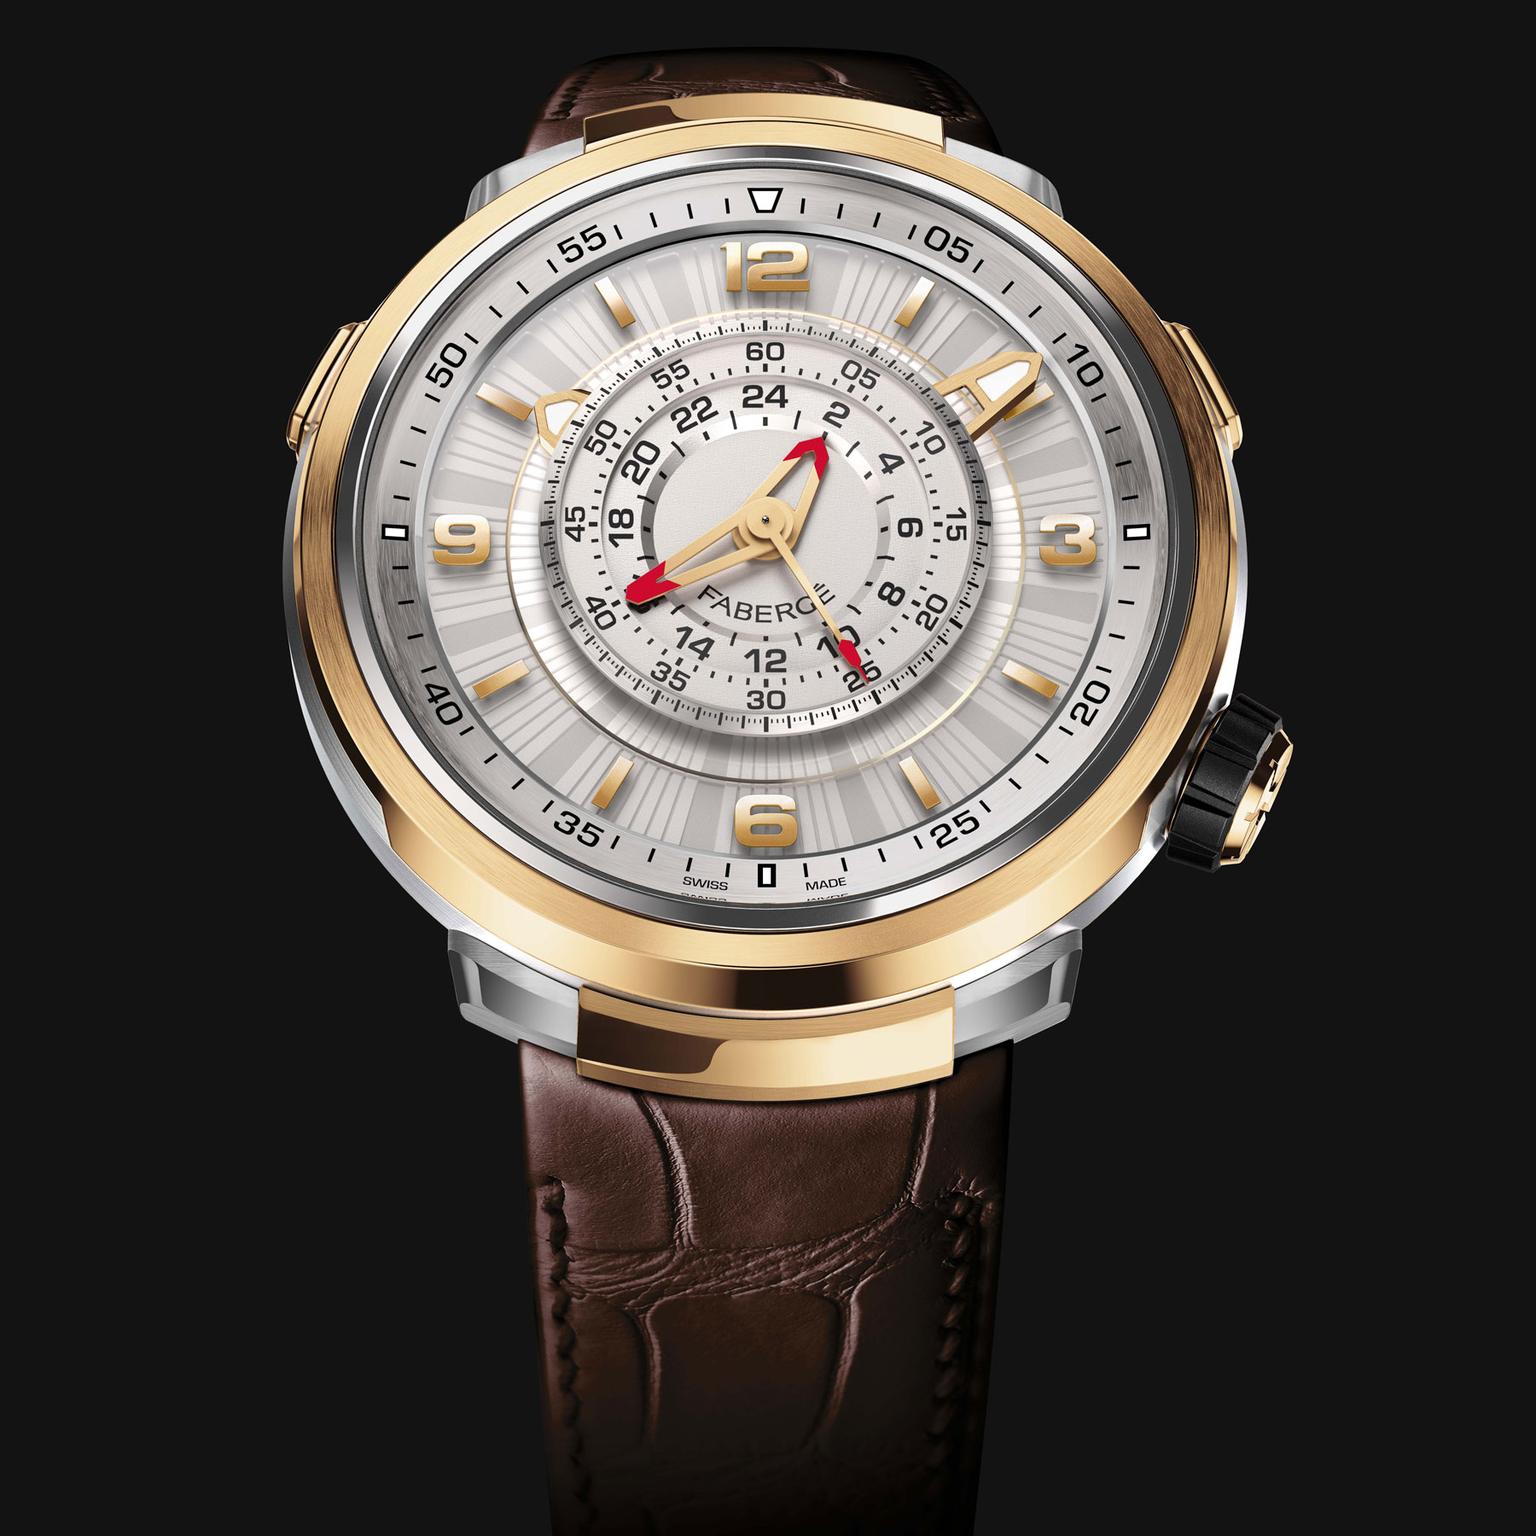 Faberge Visionnaire Chronograph watch in rose gold